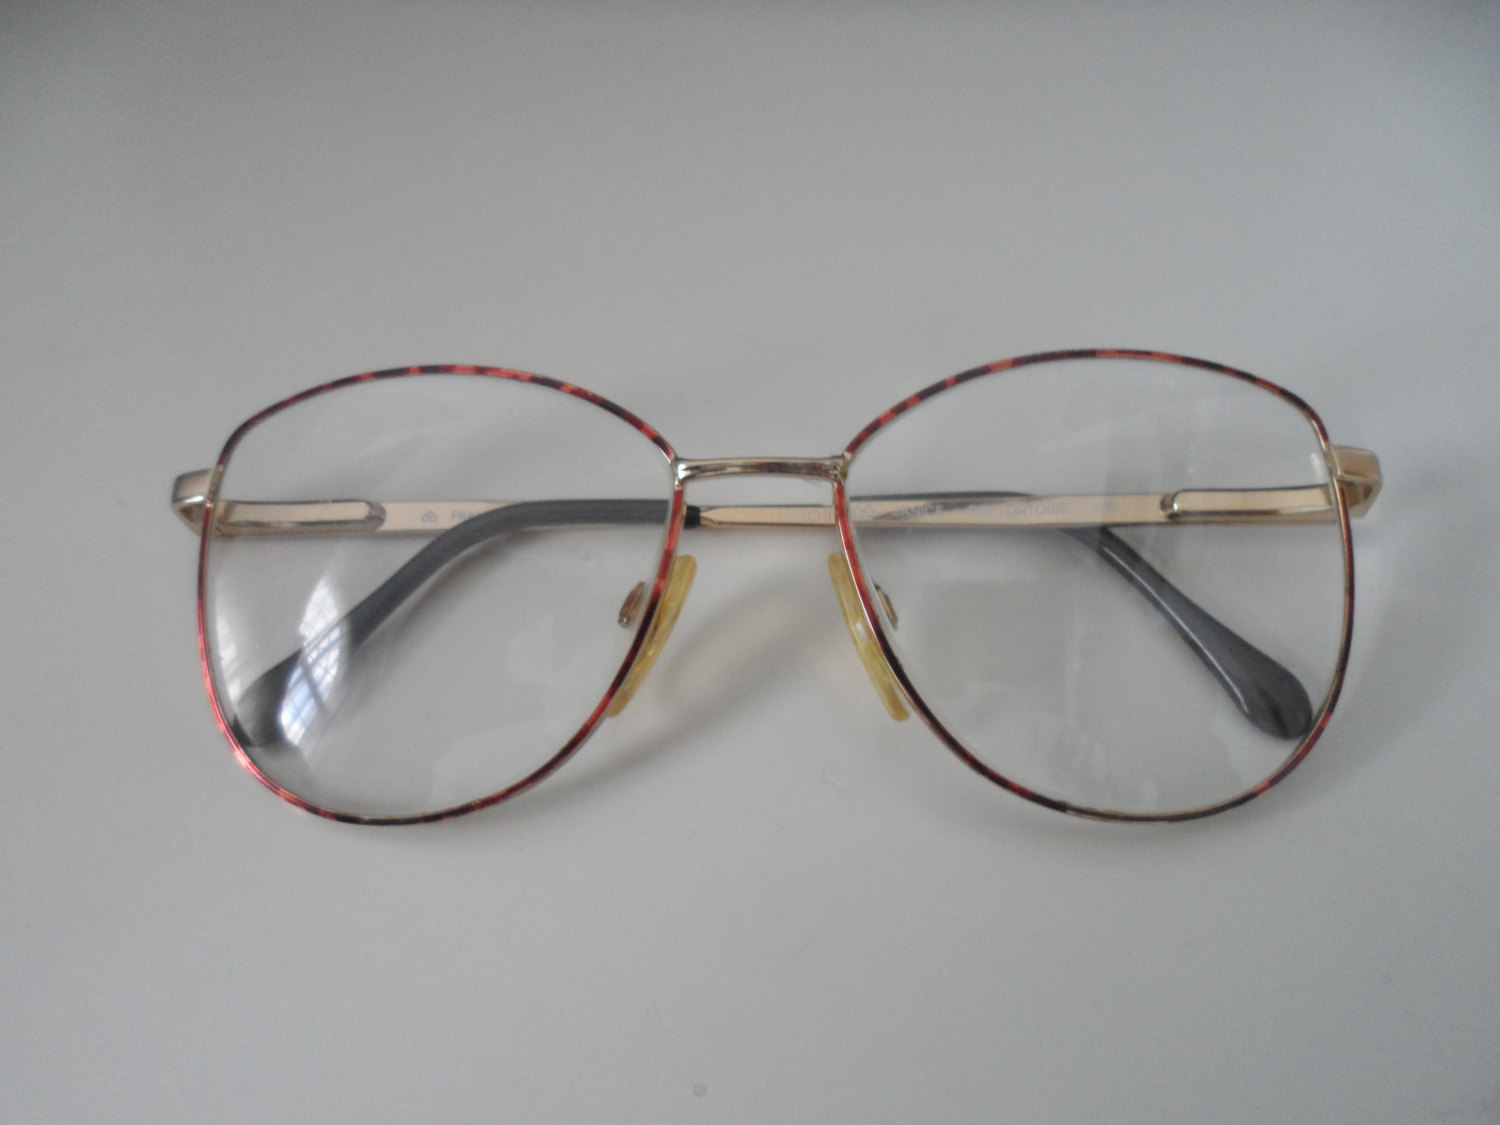 Vintage Men's eye glass frame Luxotica Gold electroplated Italy 52 16 - $25.00